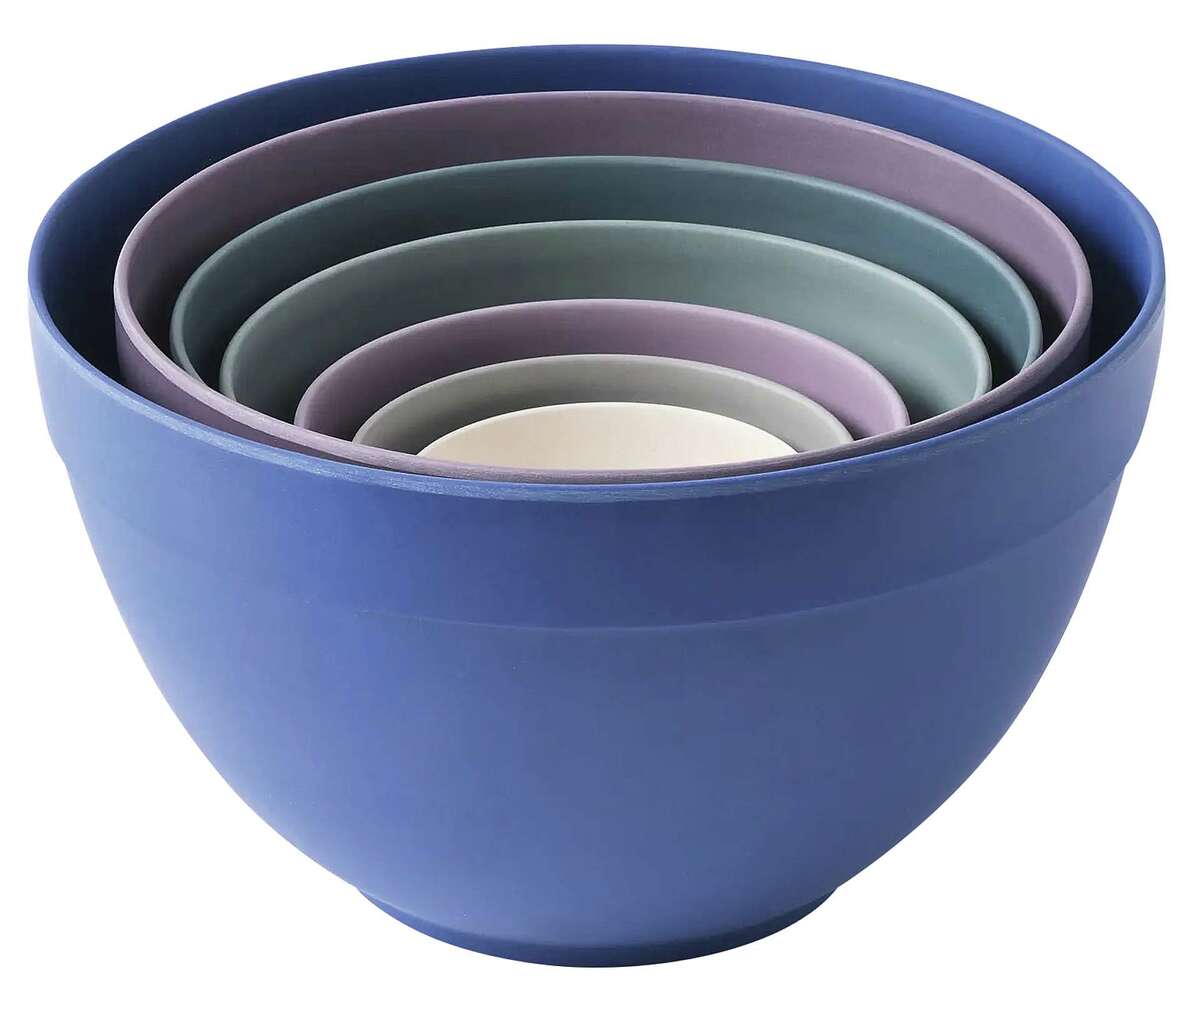 Nested bamboo mixing bowls from Bamboozle, available at Mix Design Store in Guilford